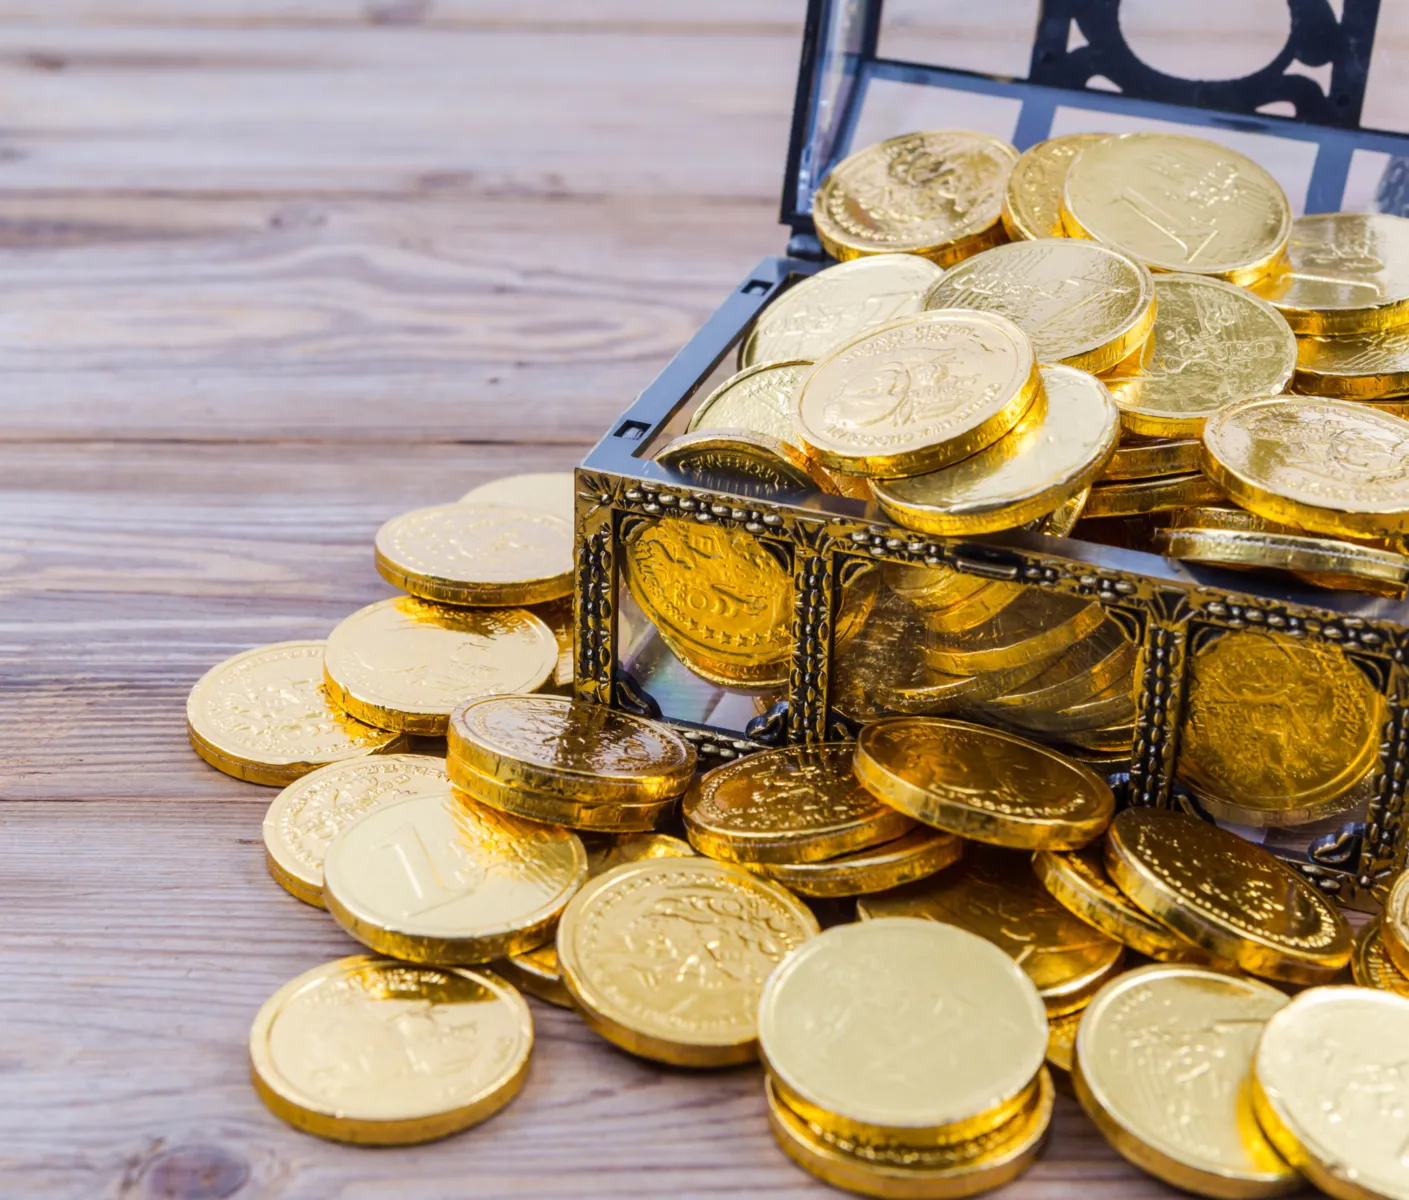 box of chocolate coins in treasure chest